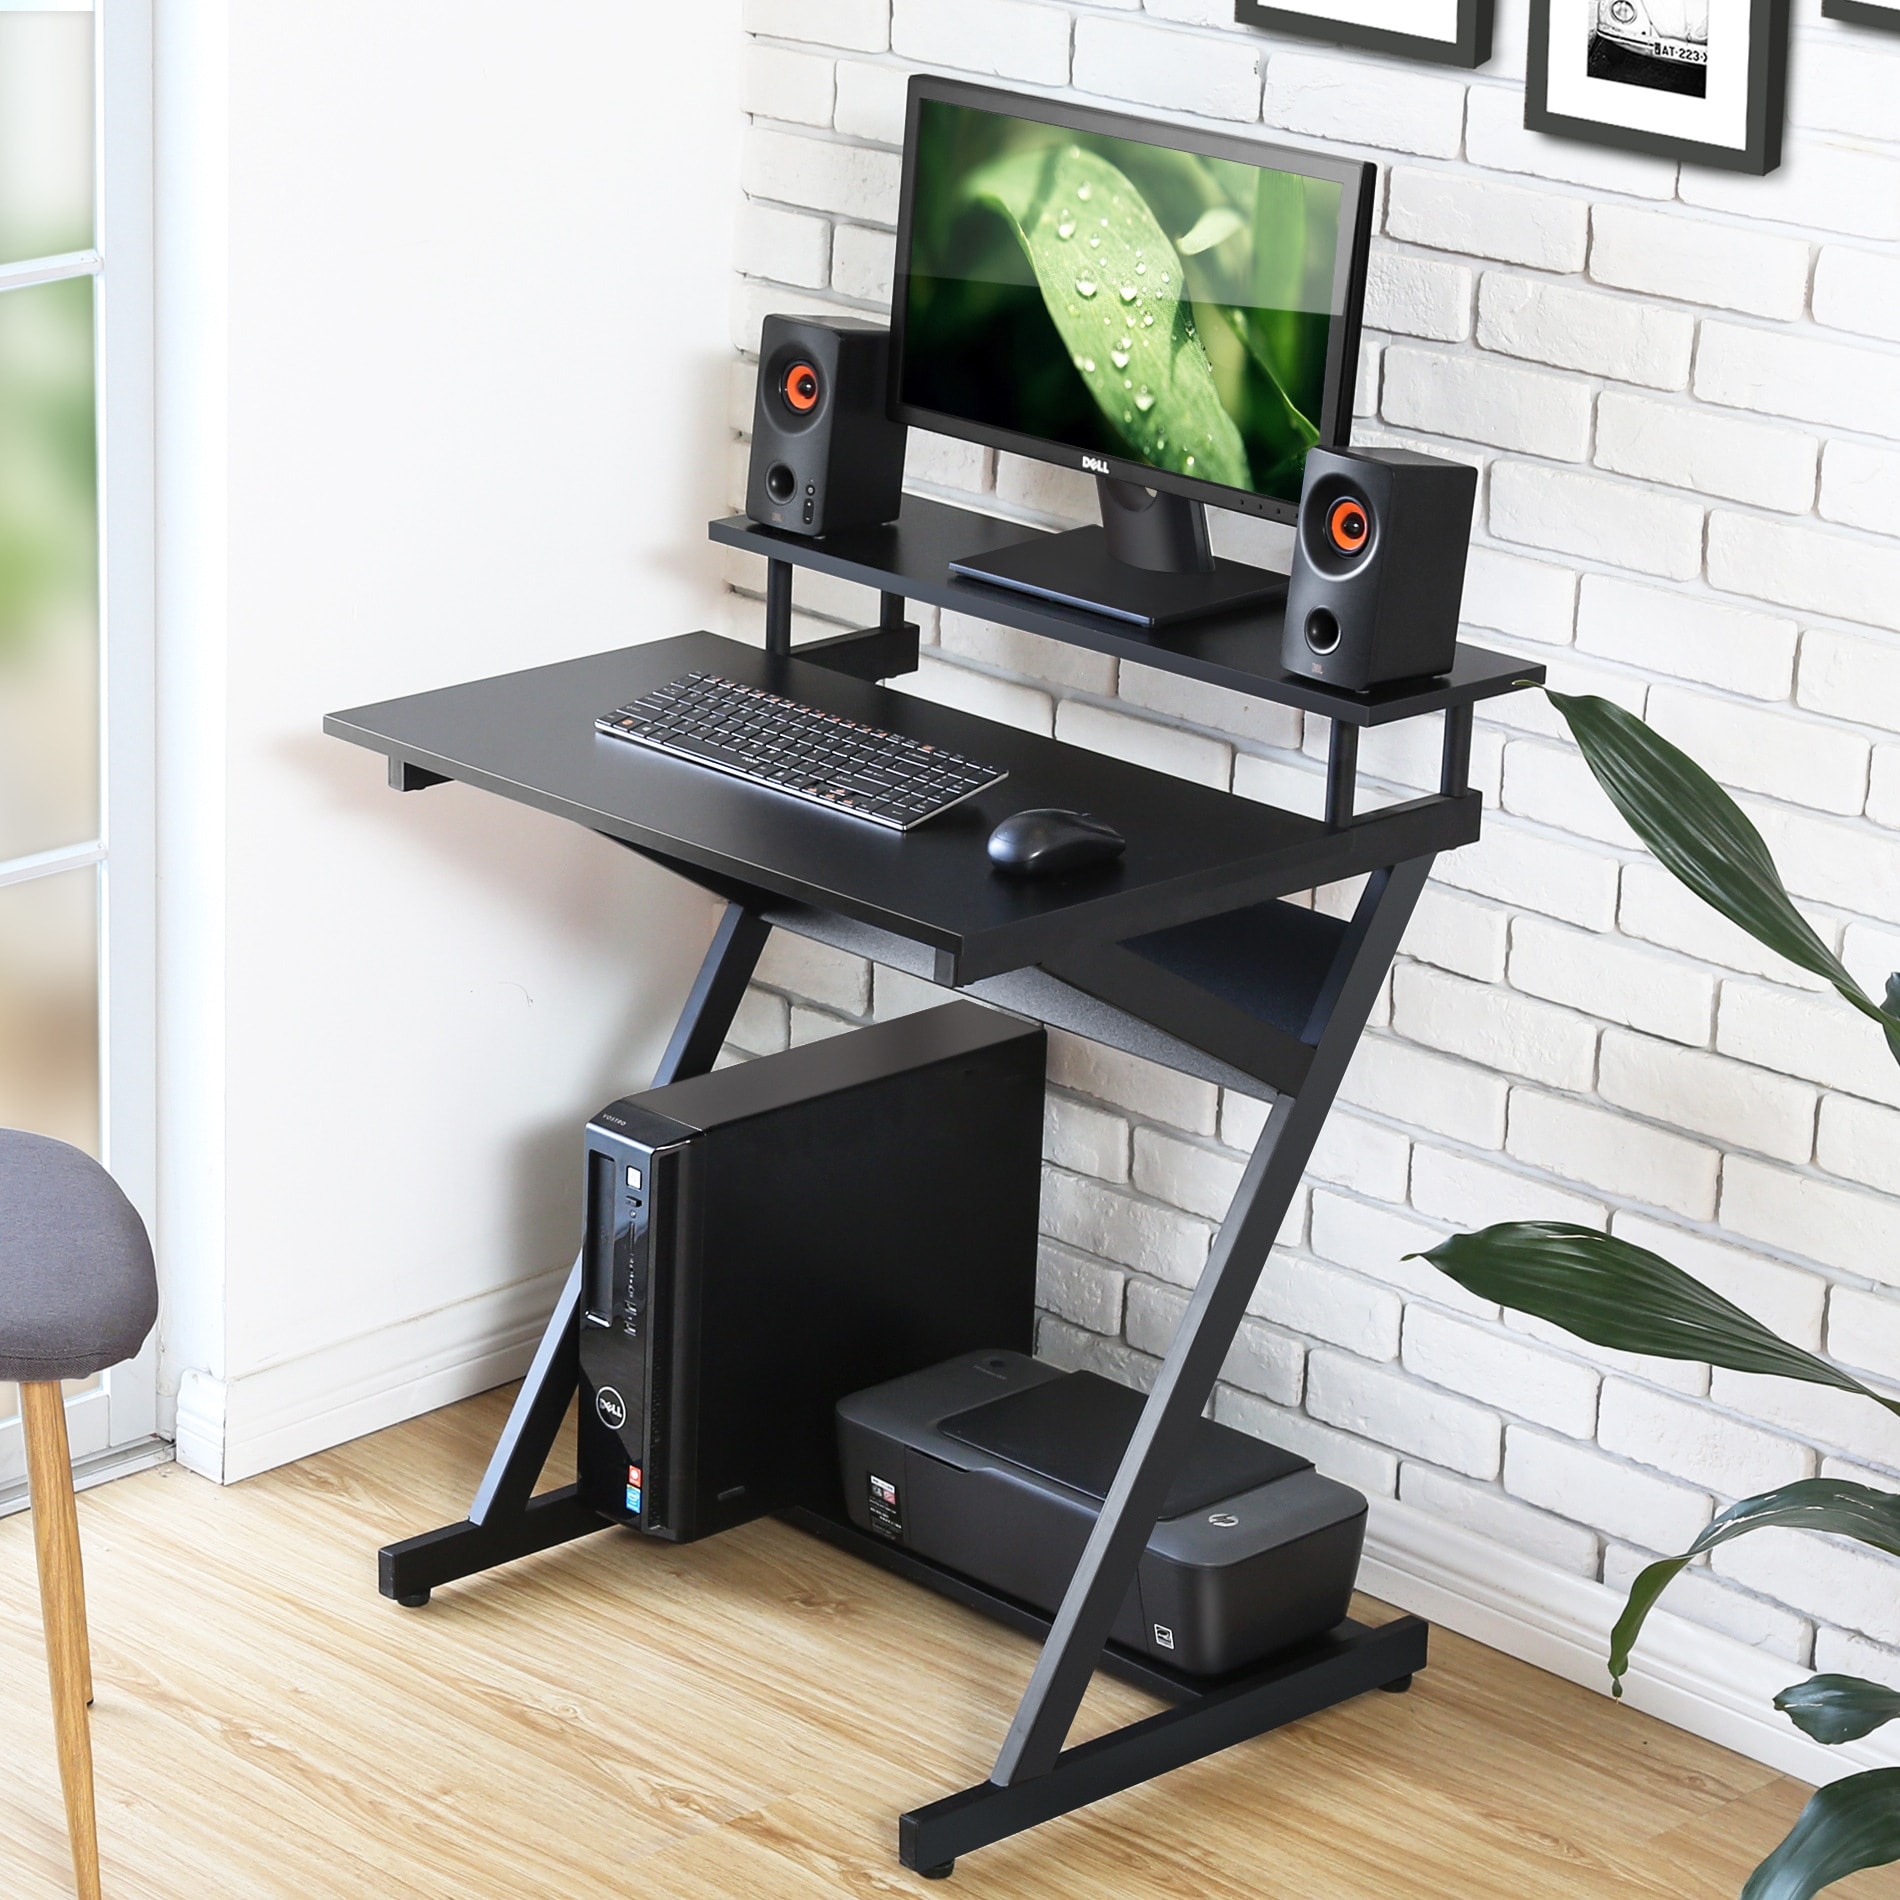 https://ak1.ostkcdn.com/images/products/is/images/direct/85e27d968d79d46647a527361db9f37f03b5517e/FITUEYES-Computer-Desk-with-Monitor-Shelf-Study-Writing-Desk.jpg